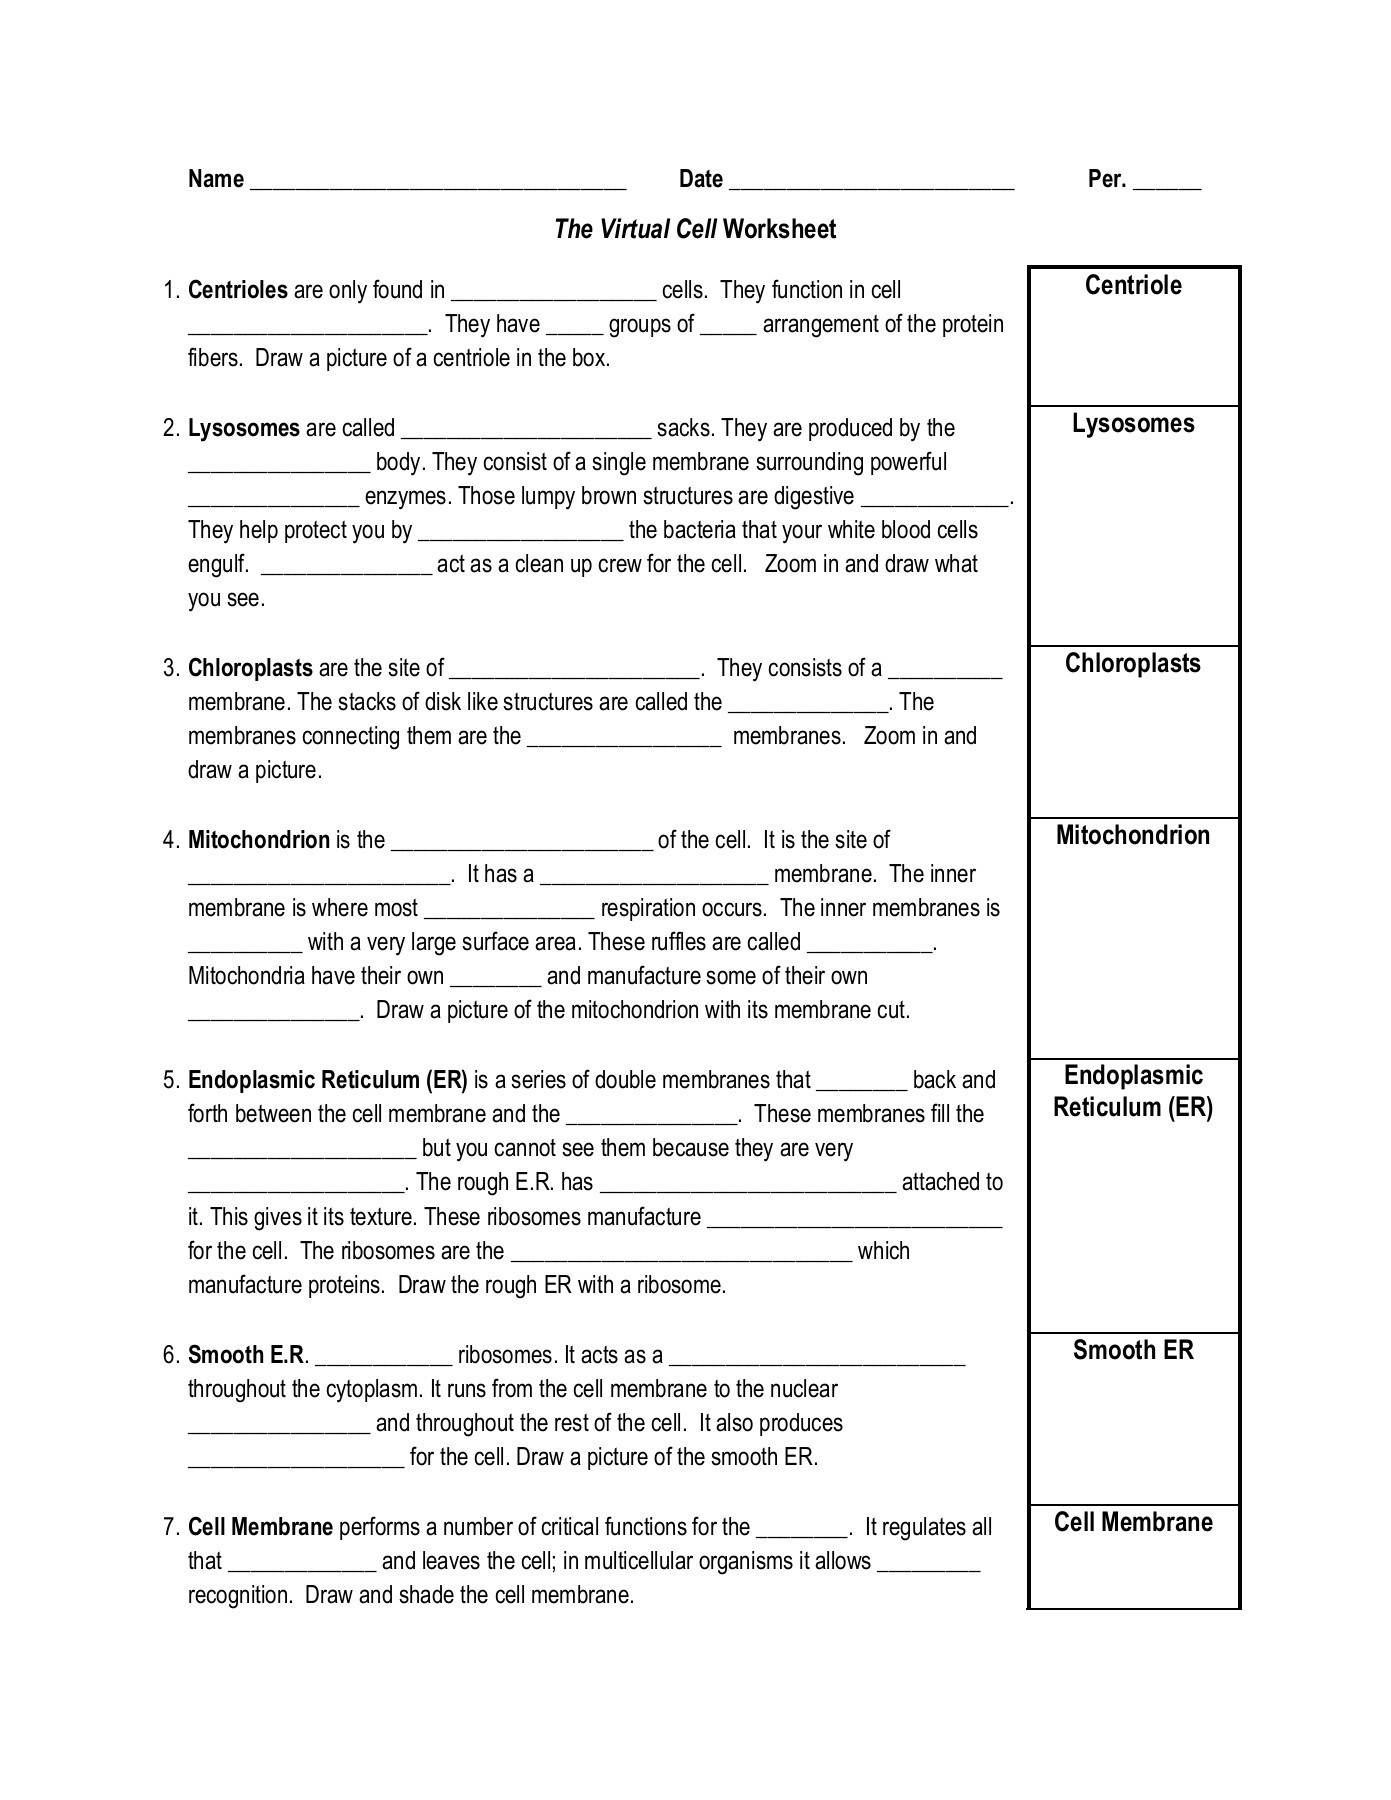 Membrane Structure and Function Worksheet the Virtual Cell Worksheet Centriole Lysosomes Pages 1